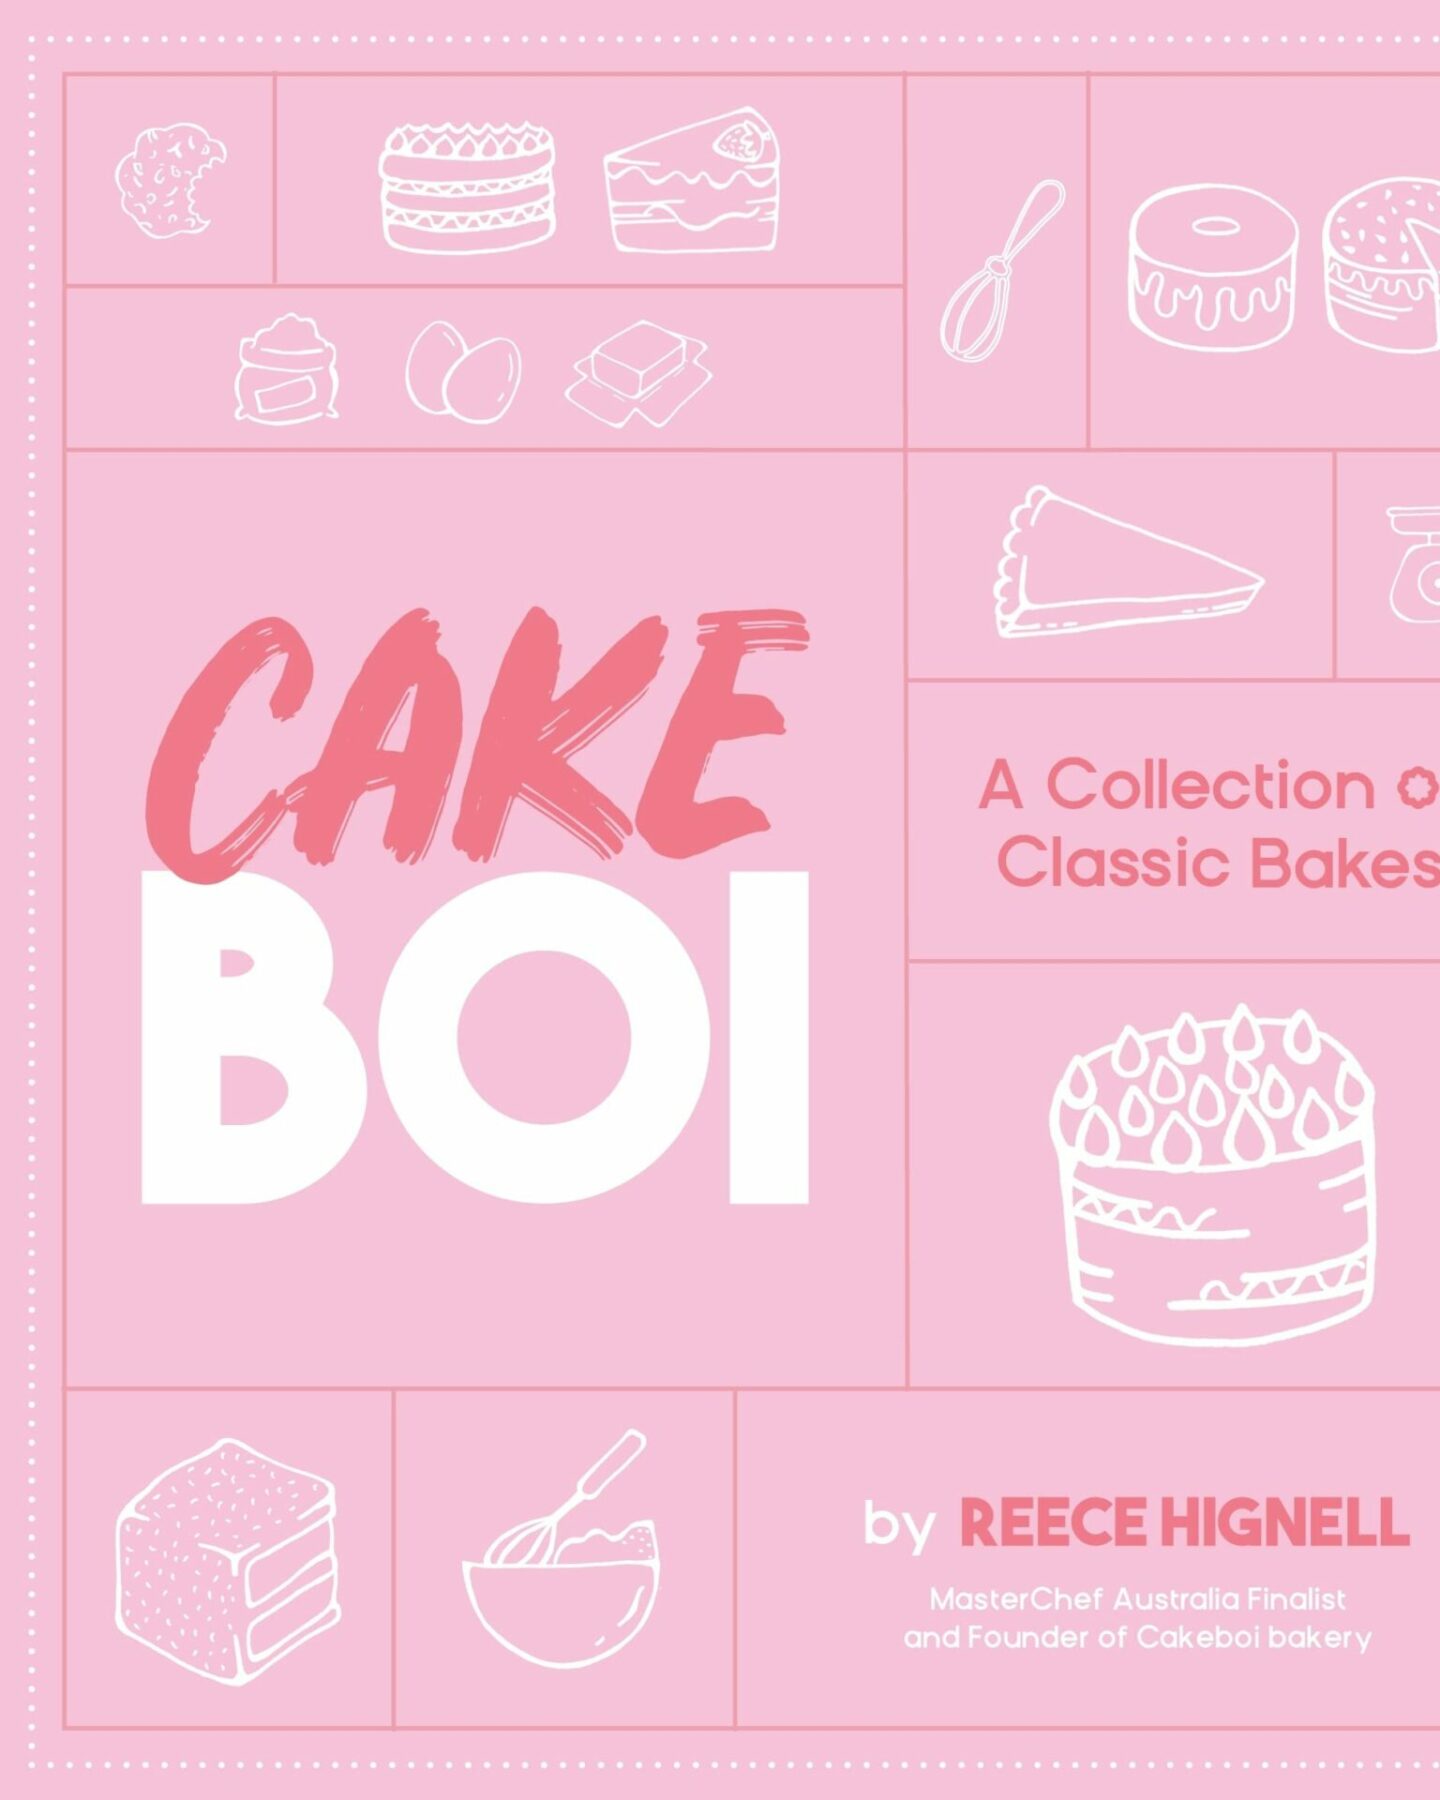 A pink book cover with simple white illustrations of various cakes, ingredients, and baking equipment